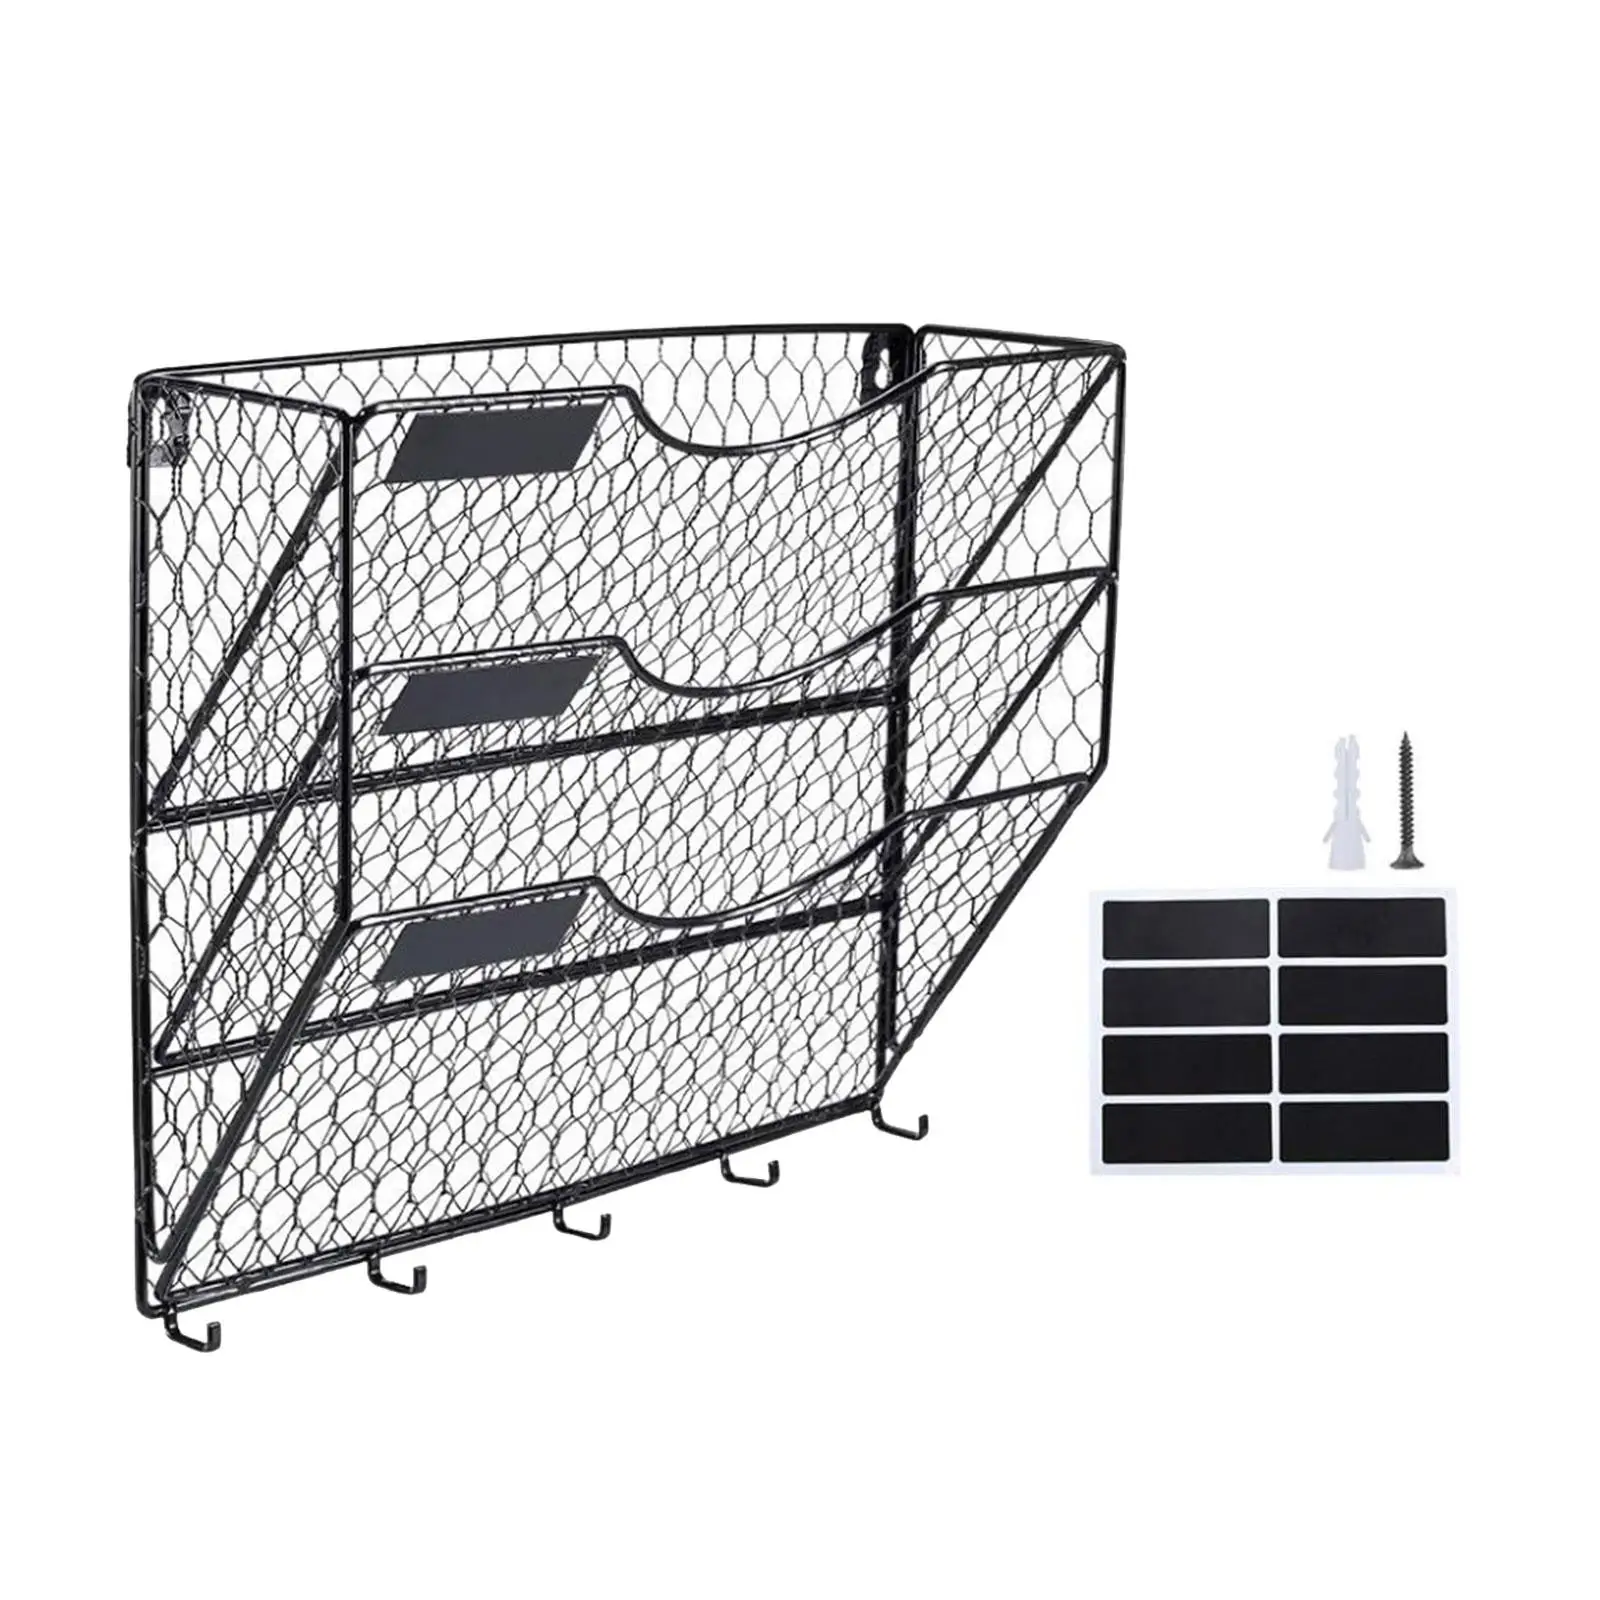 3 Tier Mesh Wall File Holder Notebooks Literature Space Saving Magazine Rack Storage for Bedroom Living Room Office Hotel Home